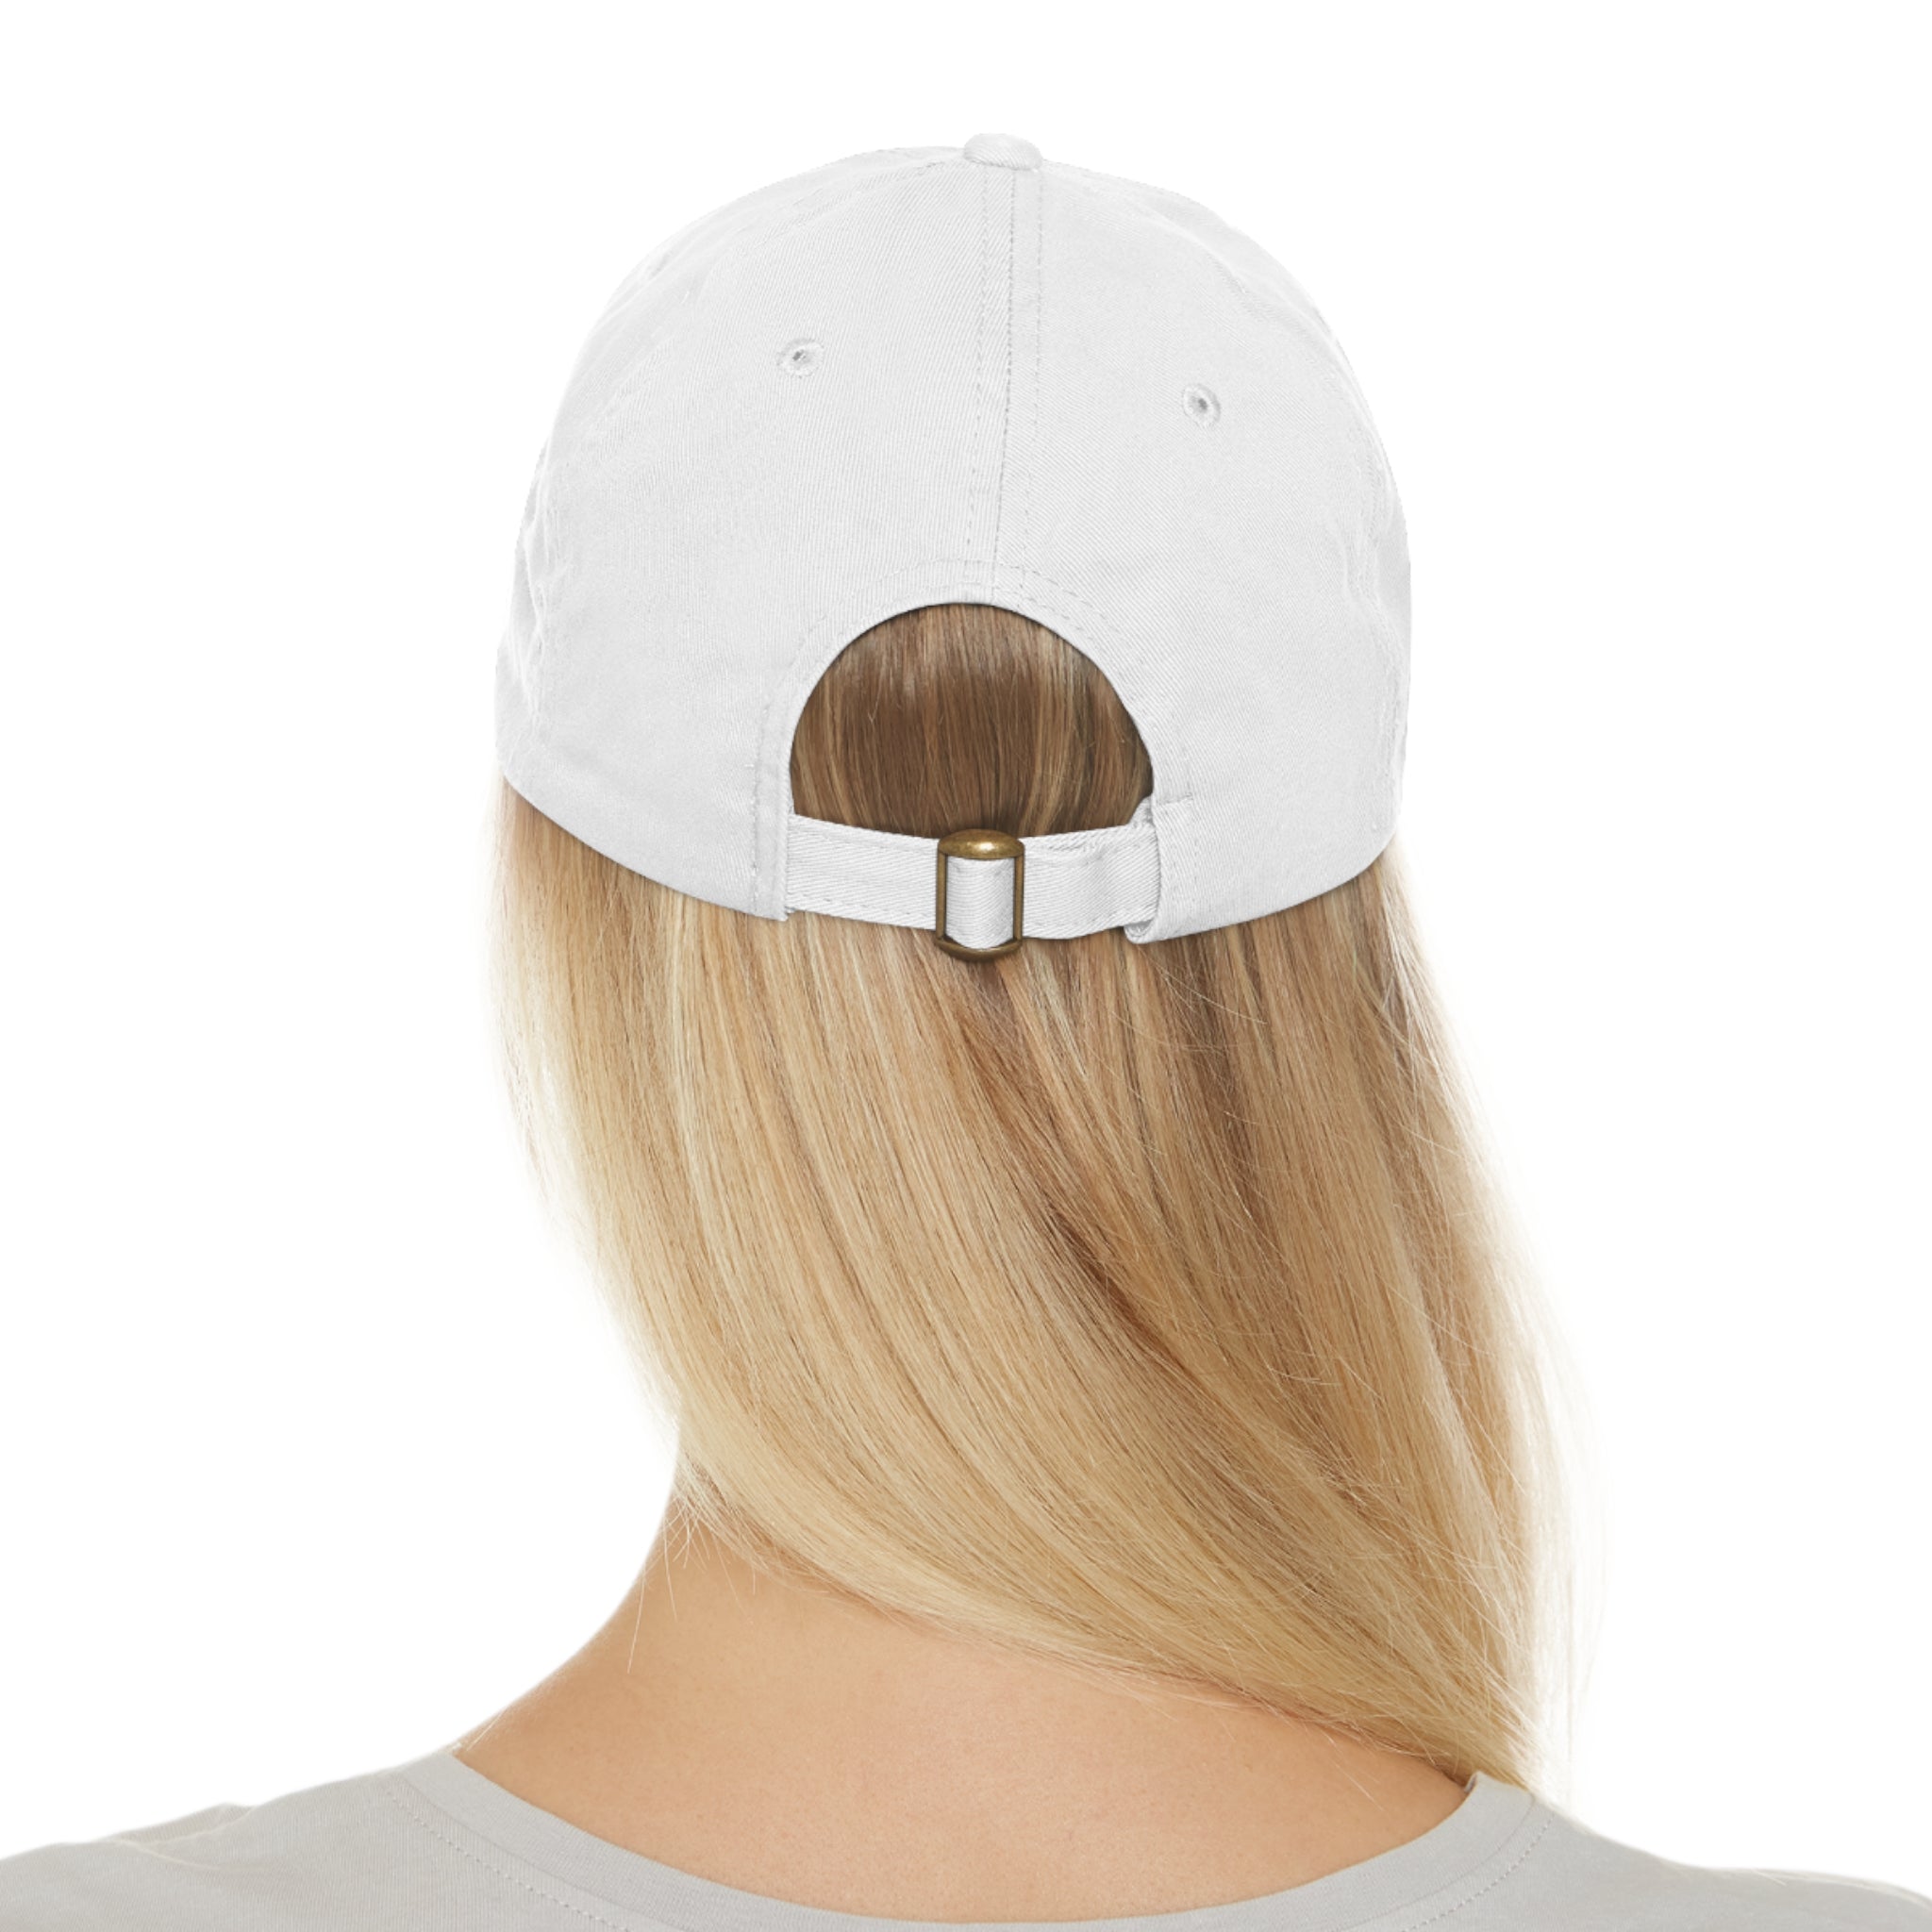 Apollo Moda White & Brown Dad Hat with Leather Patch (Rectangle)